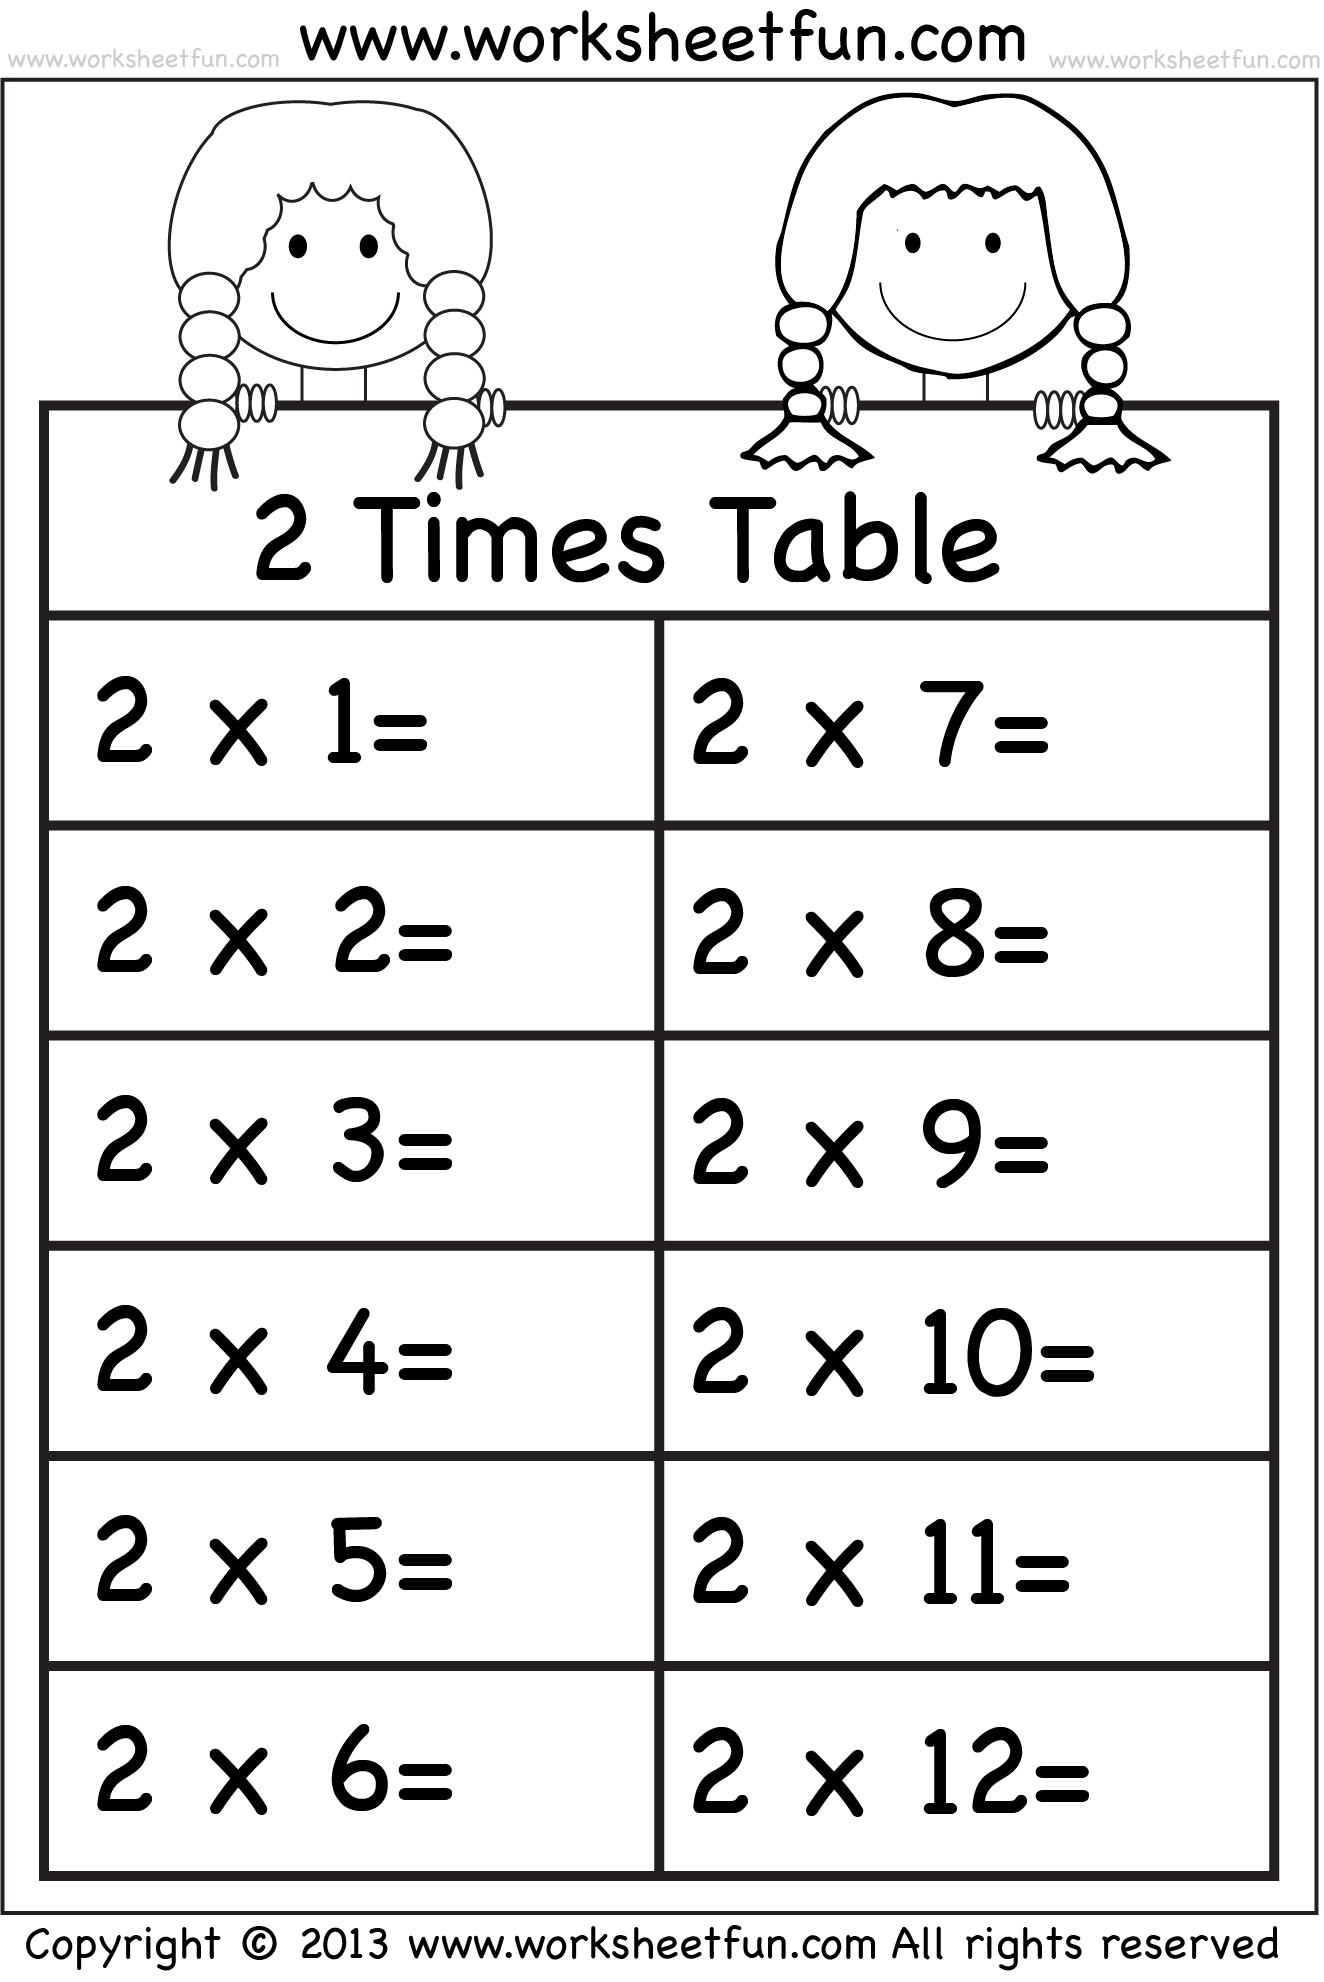 Times Tables Worksheets – 225, 225, 225, 25, 25, 25, 25, 25, 25, 25 and 2525 Intended For 2 Times Table Worksheet